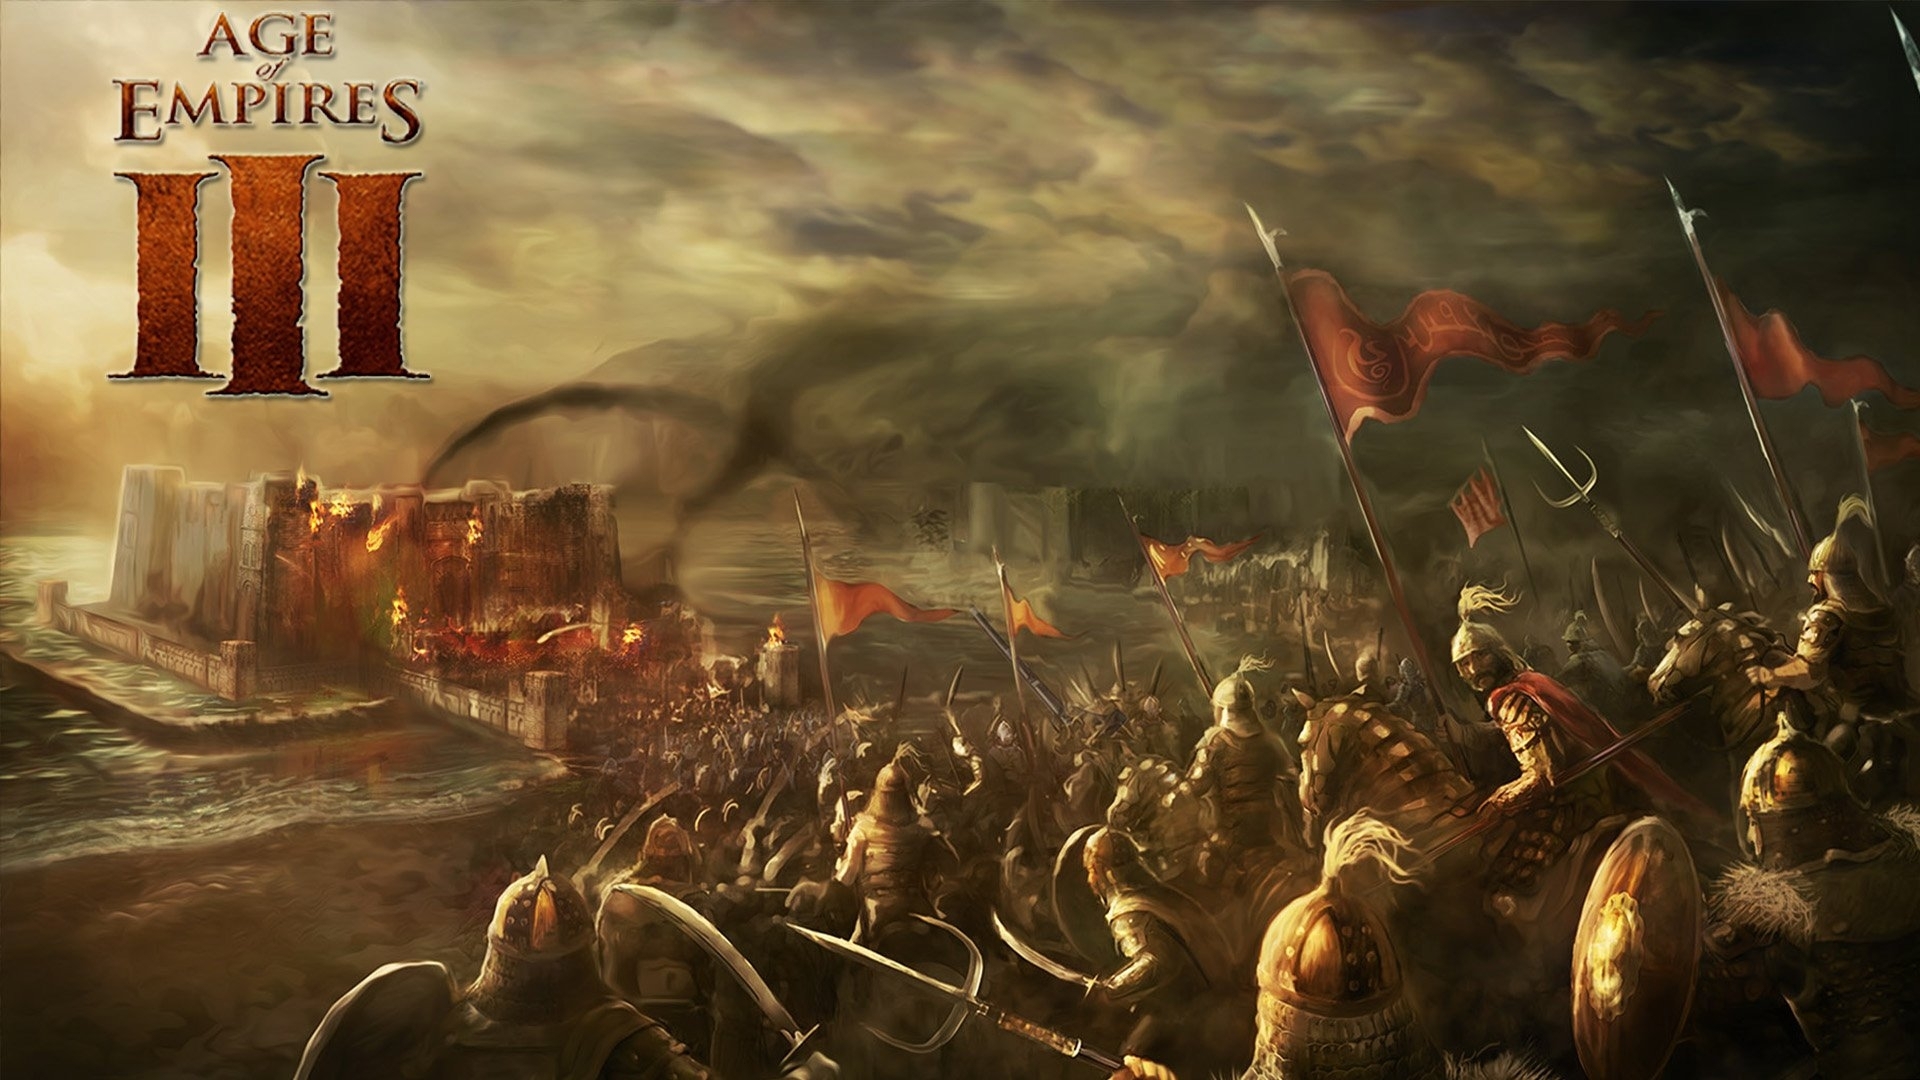 10 Latest Age Of Empires Wallpaper FULL HD 1080p For PC Background